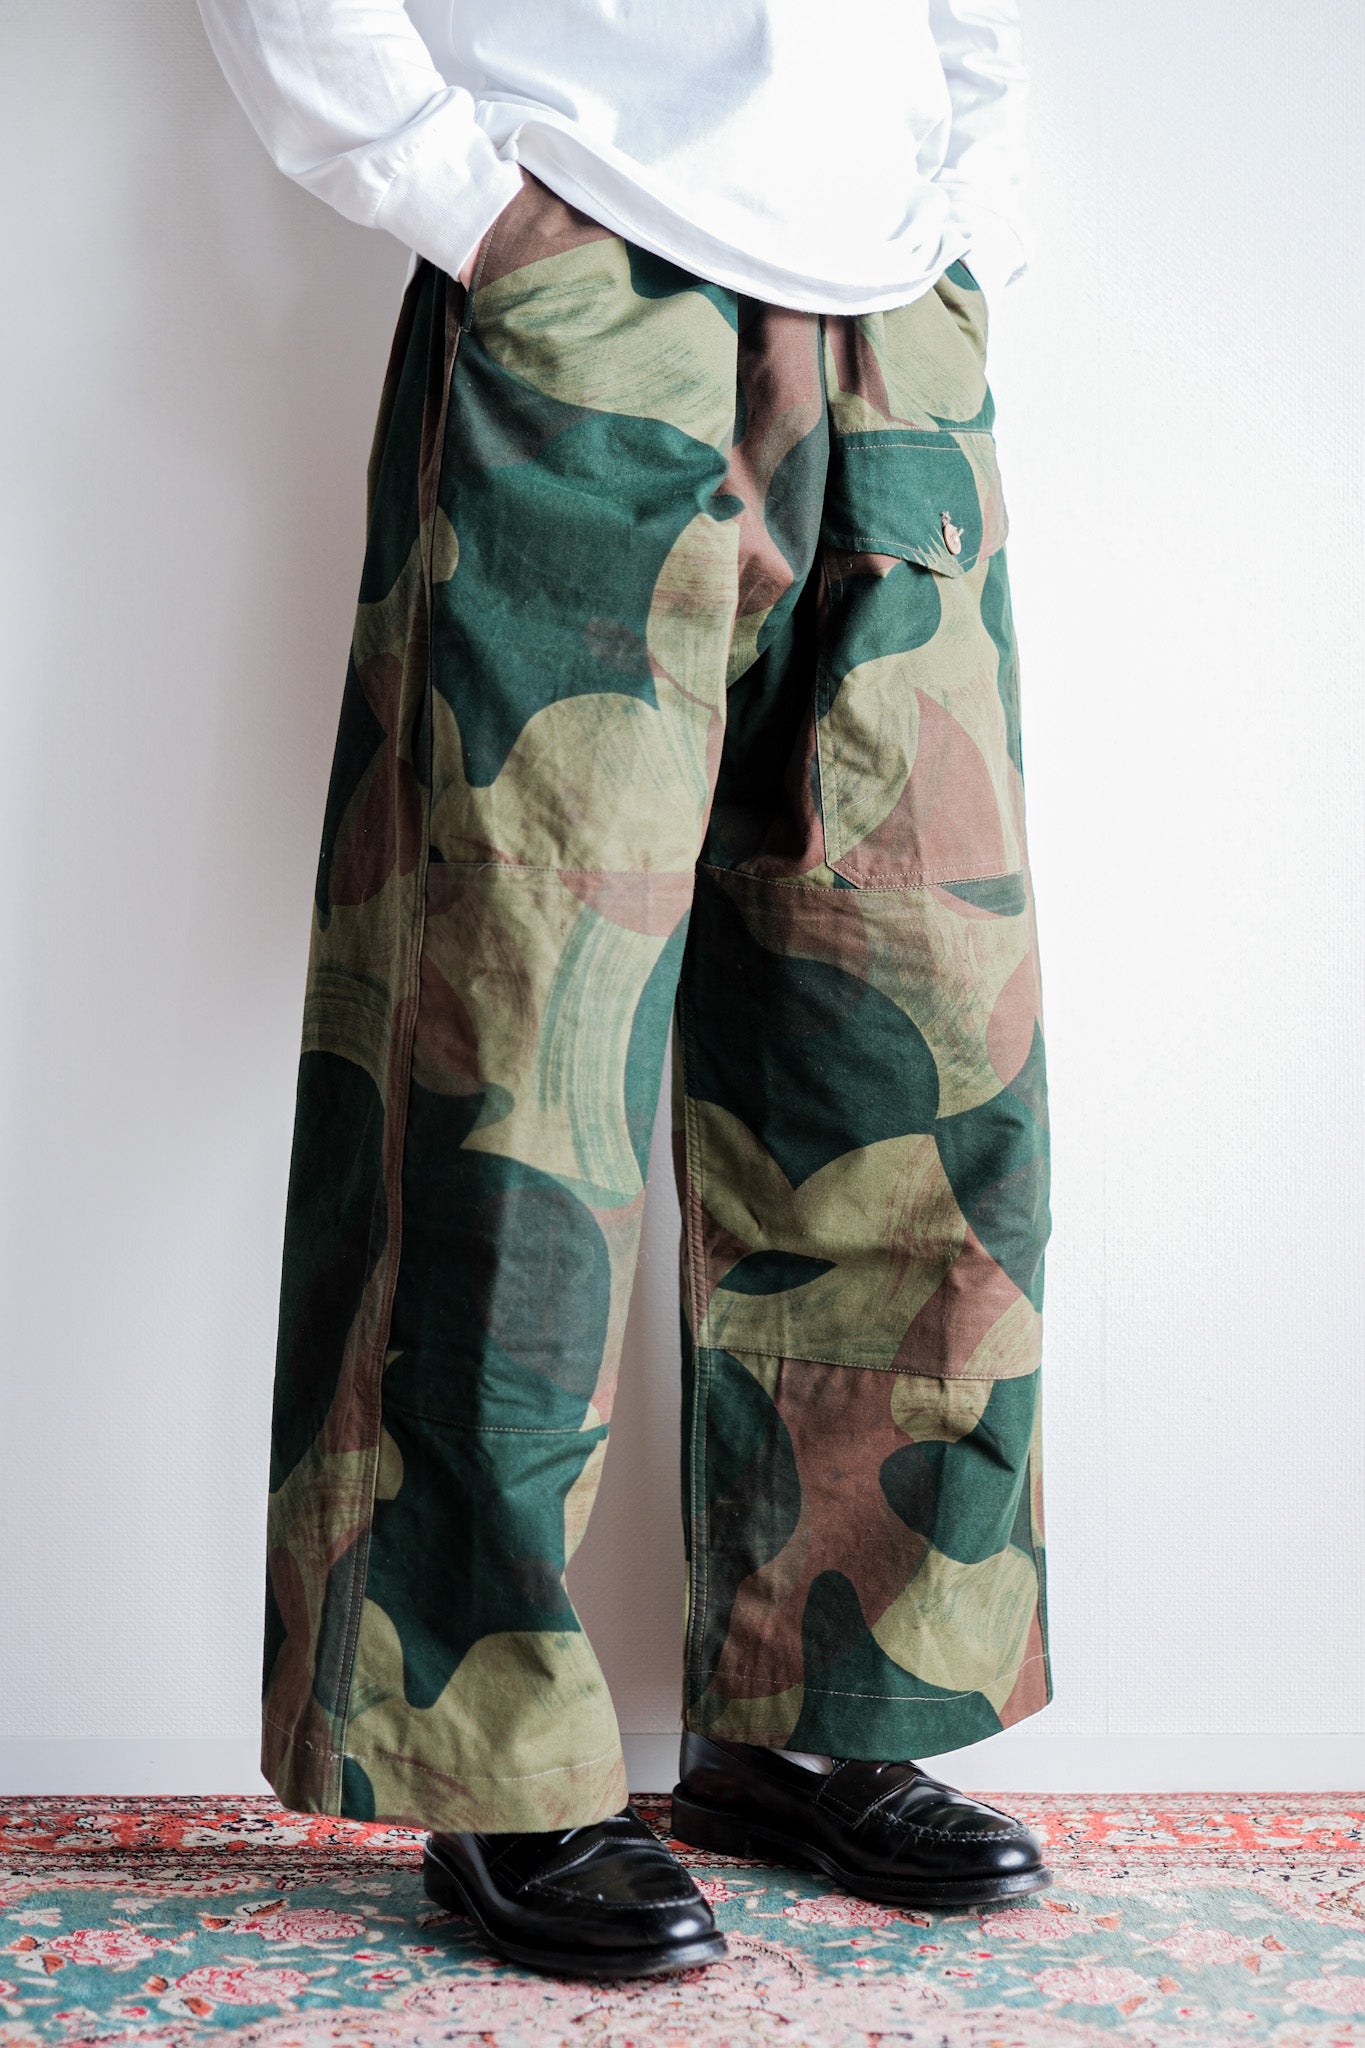 [~ 50's] Belgian Army Moon & BALLS CAMOUFLAGE AIRBORNE PANTS SIZE.6 "Early Type" "Dead Stock"